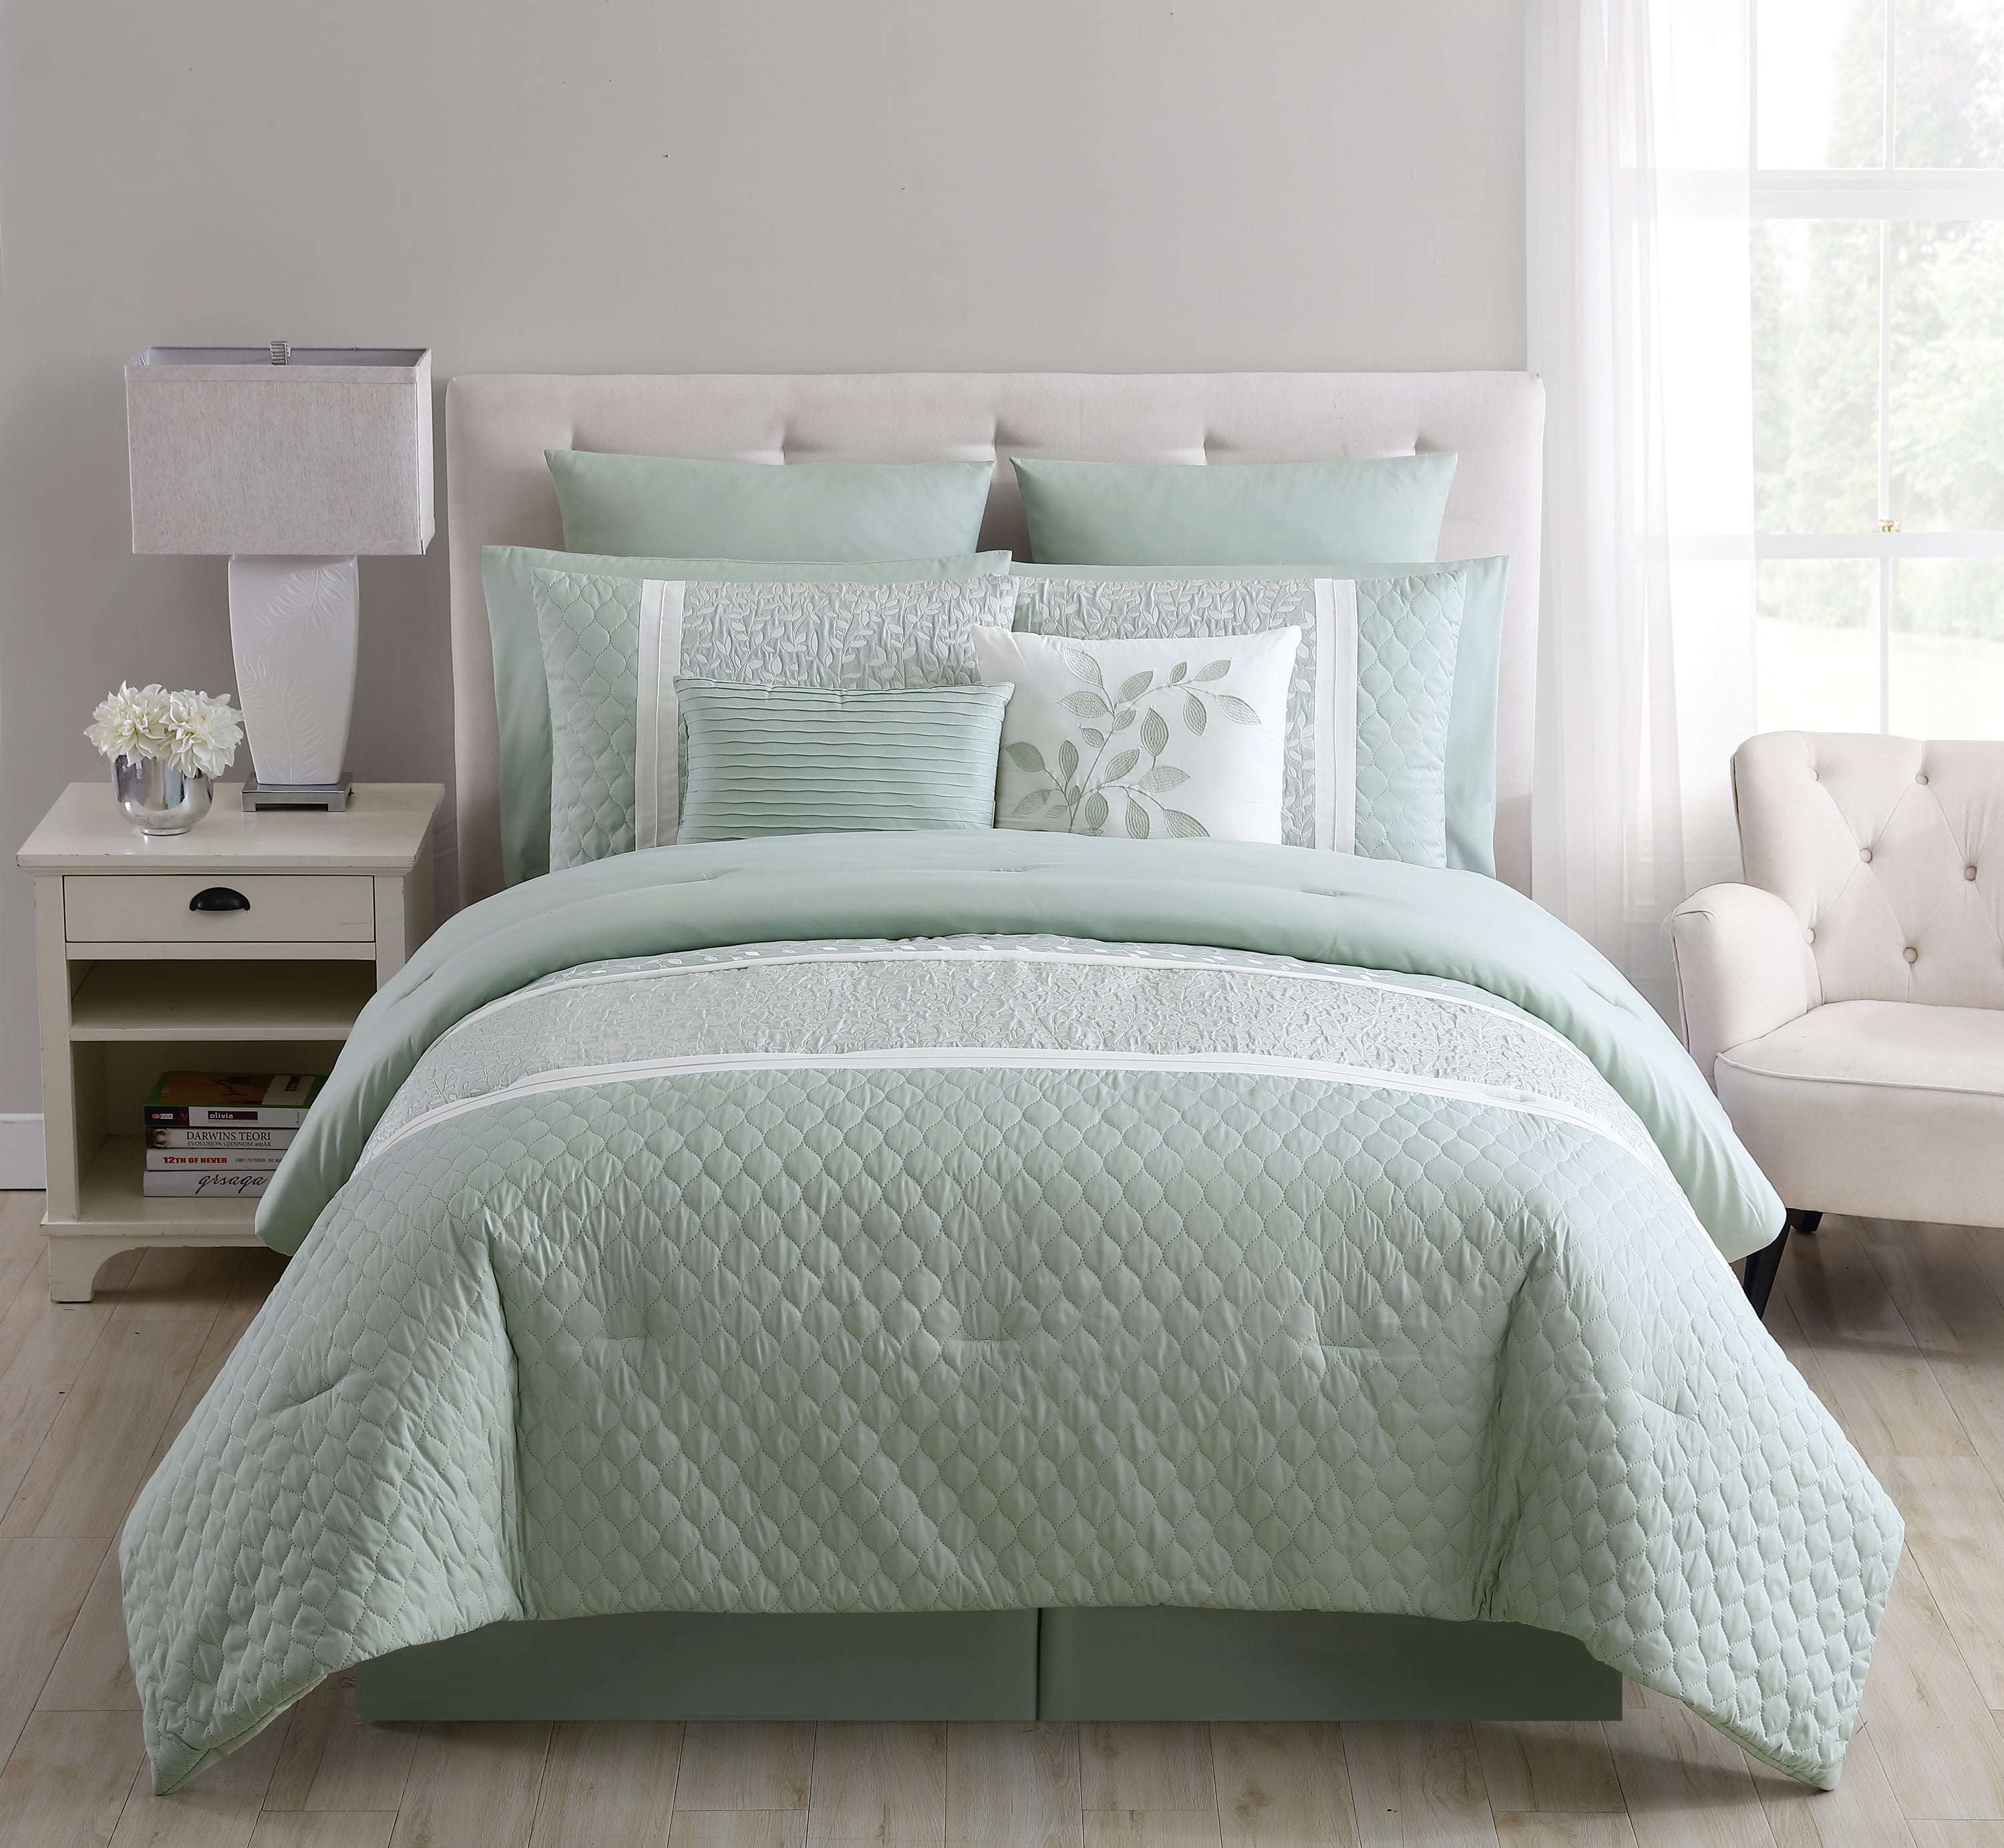 Ginny's Mint Green Electric Can Ope, Catalog Company Returns;  Household, Kitchen, Bedding, More!